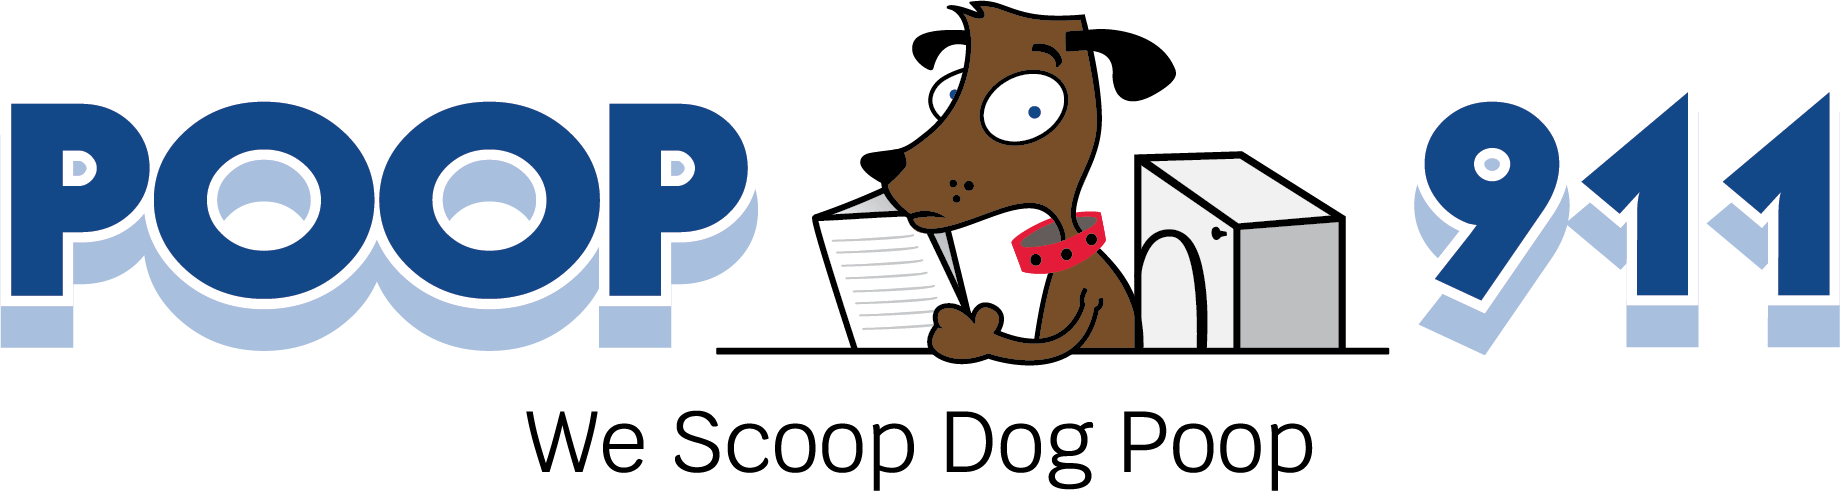 dog poop clean up company